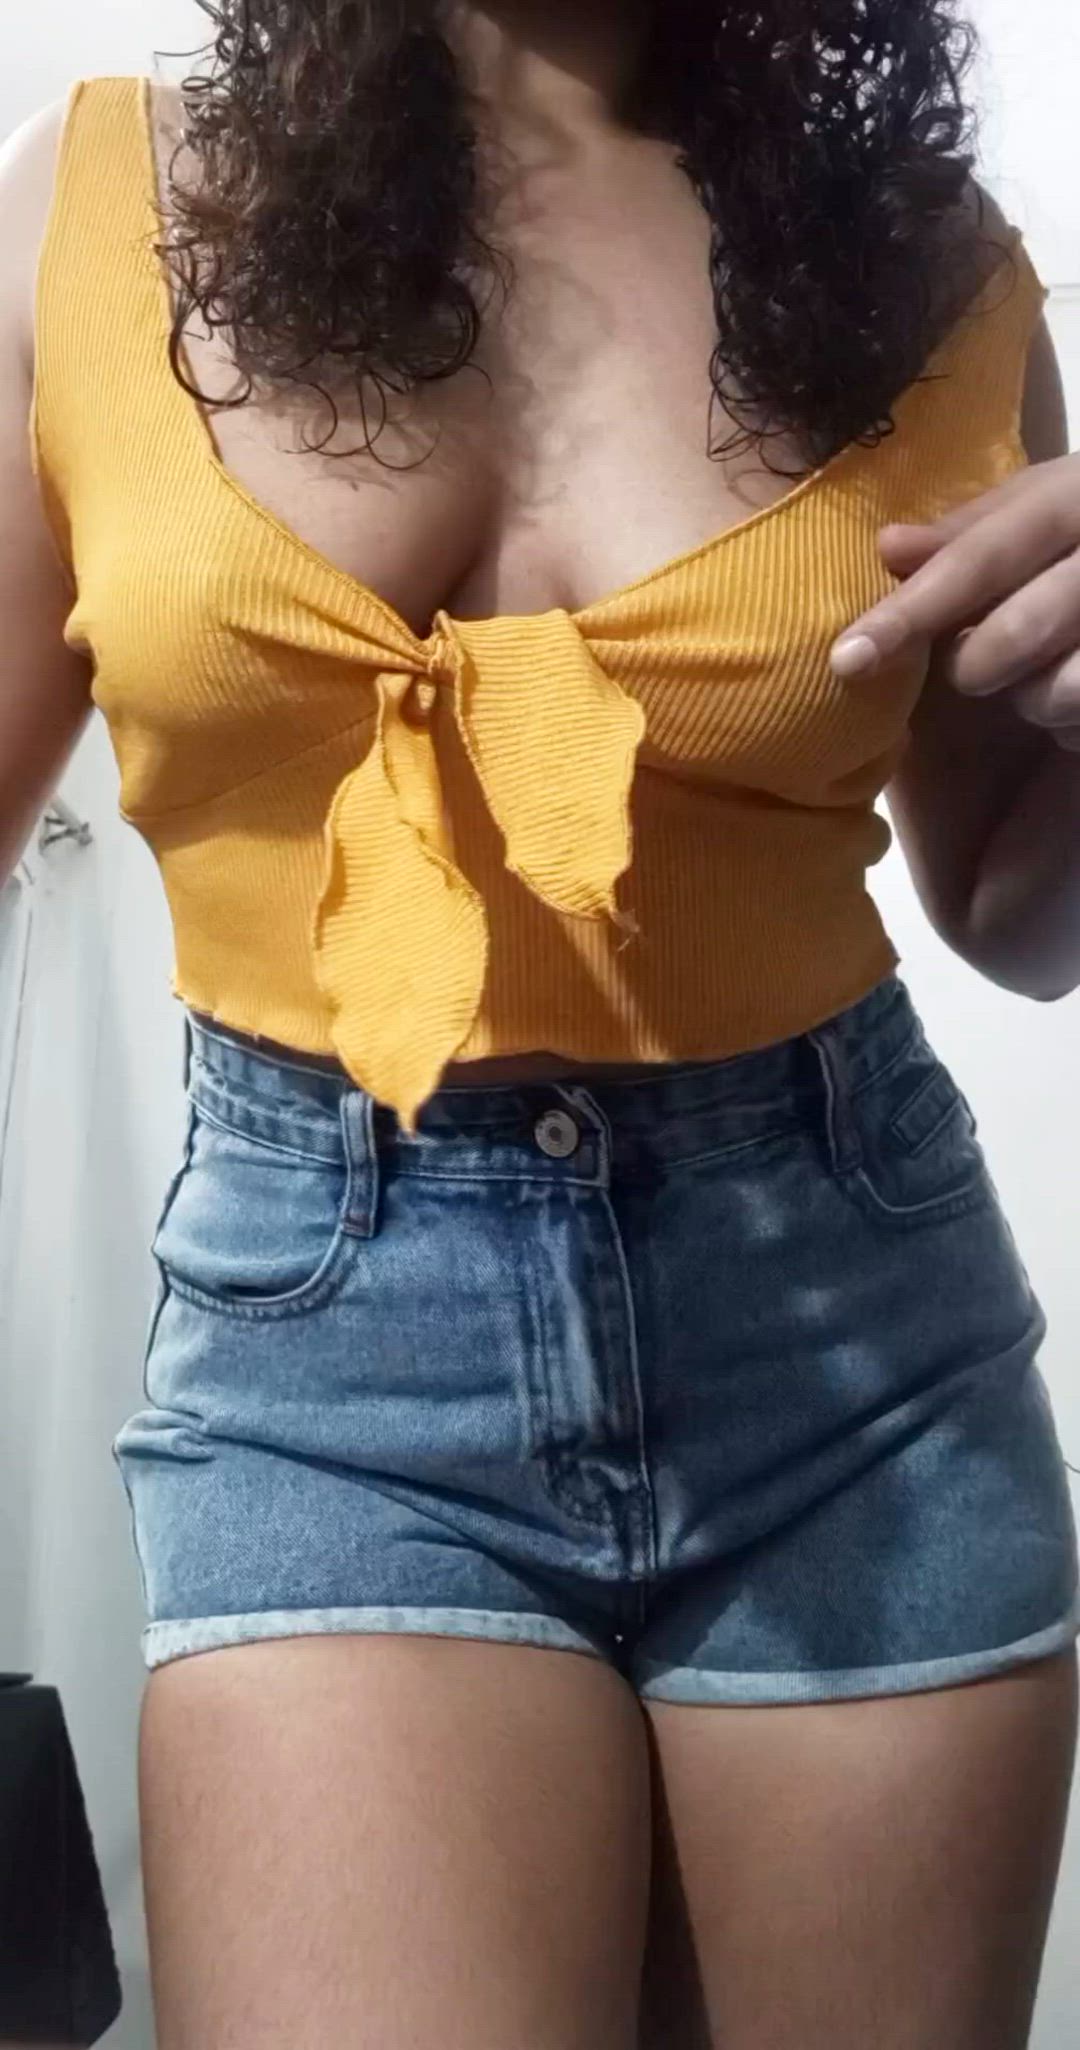 Big Tits porn video with onlyfans model  <strong>@feelinhothothot</strong>